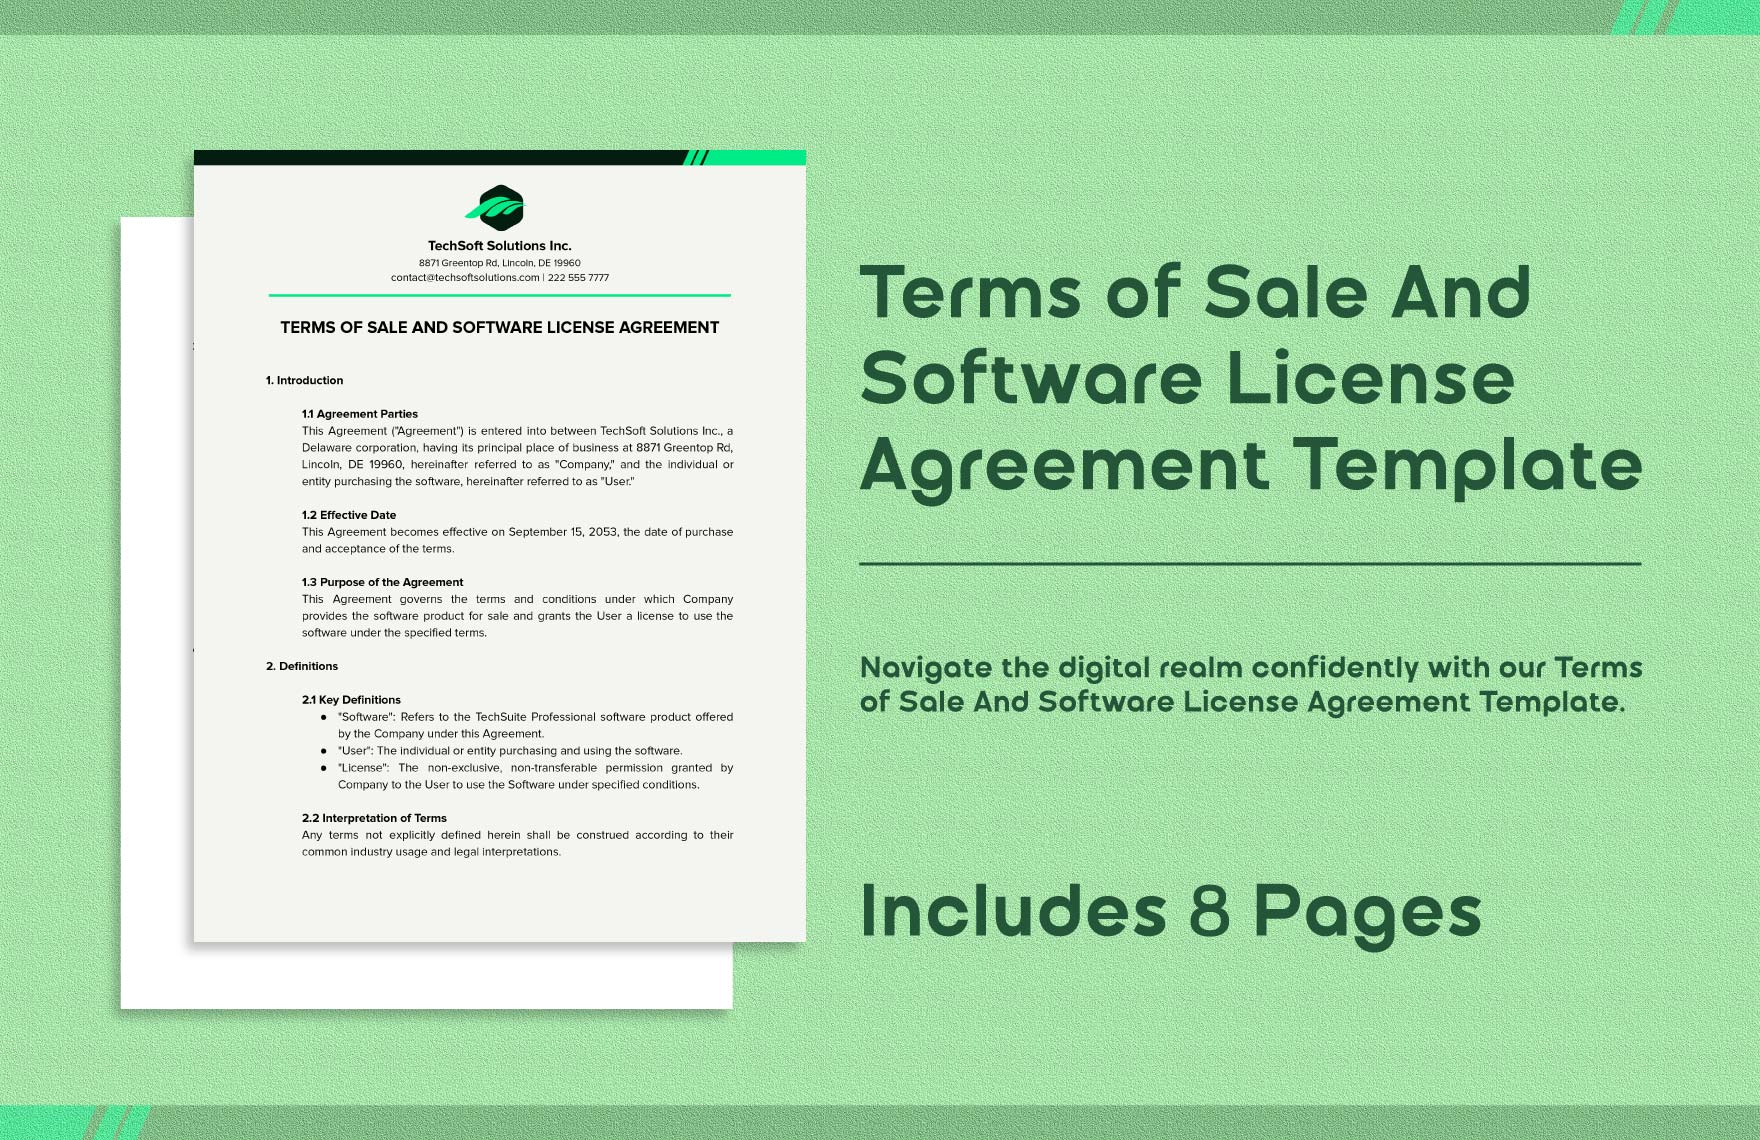 Terms of Sale And Software License Agreement Template